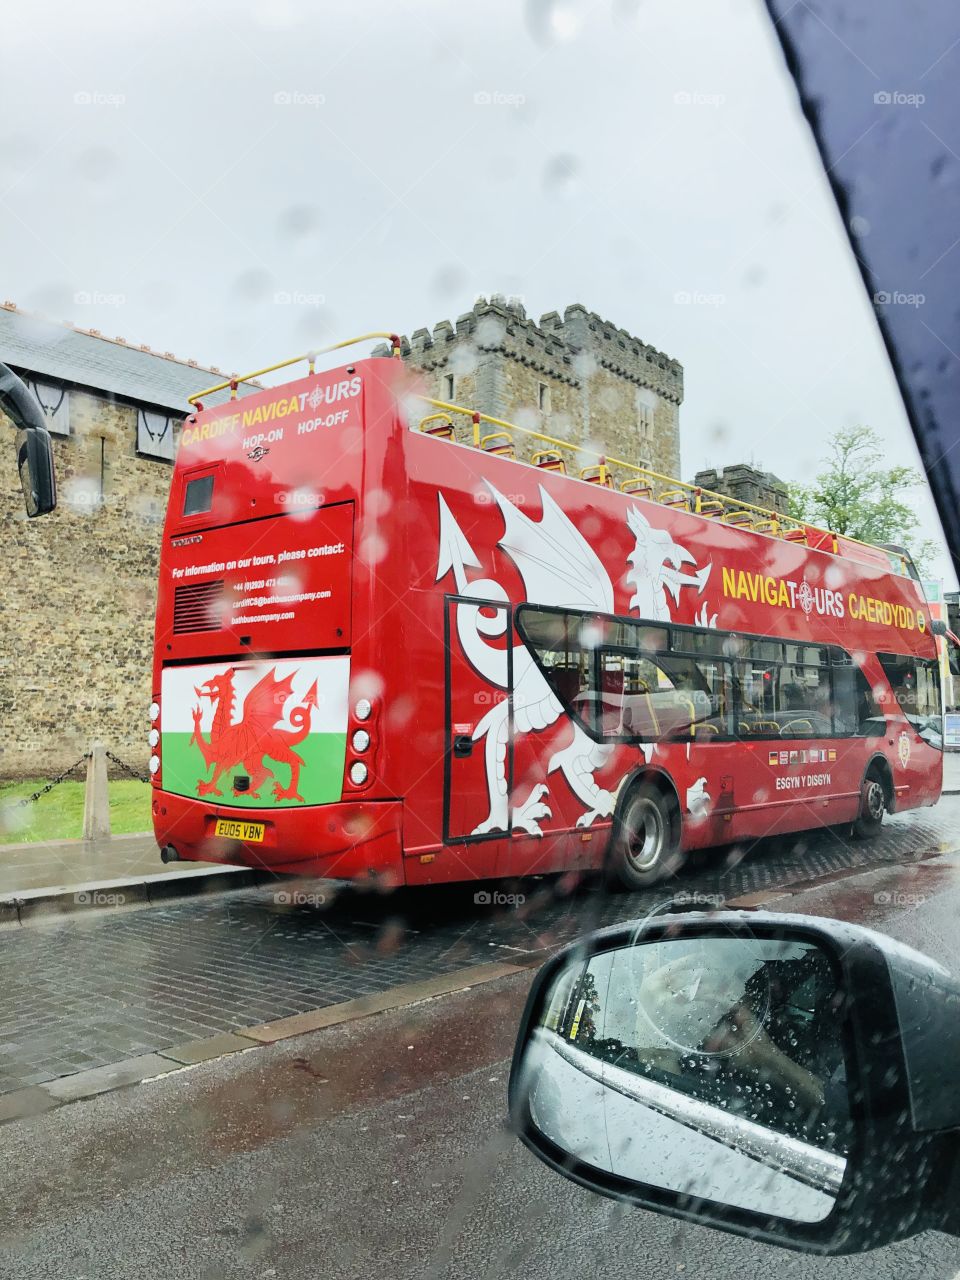 Tour bus ‘ outside Cardiff Castle ‘ on a rainy day 💦